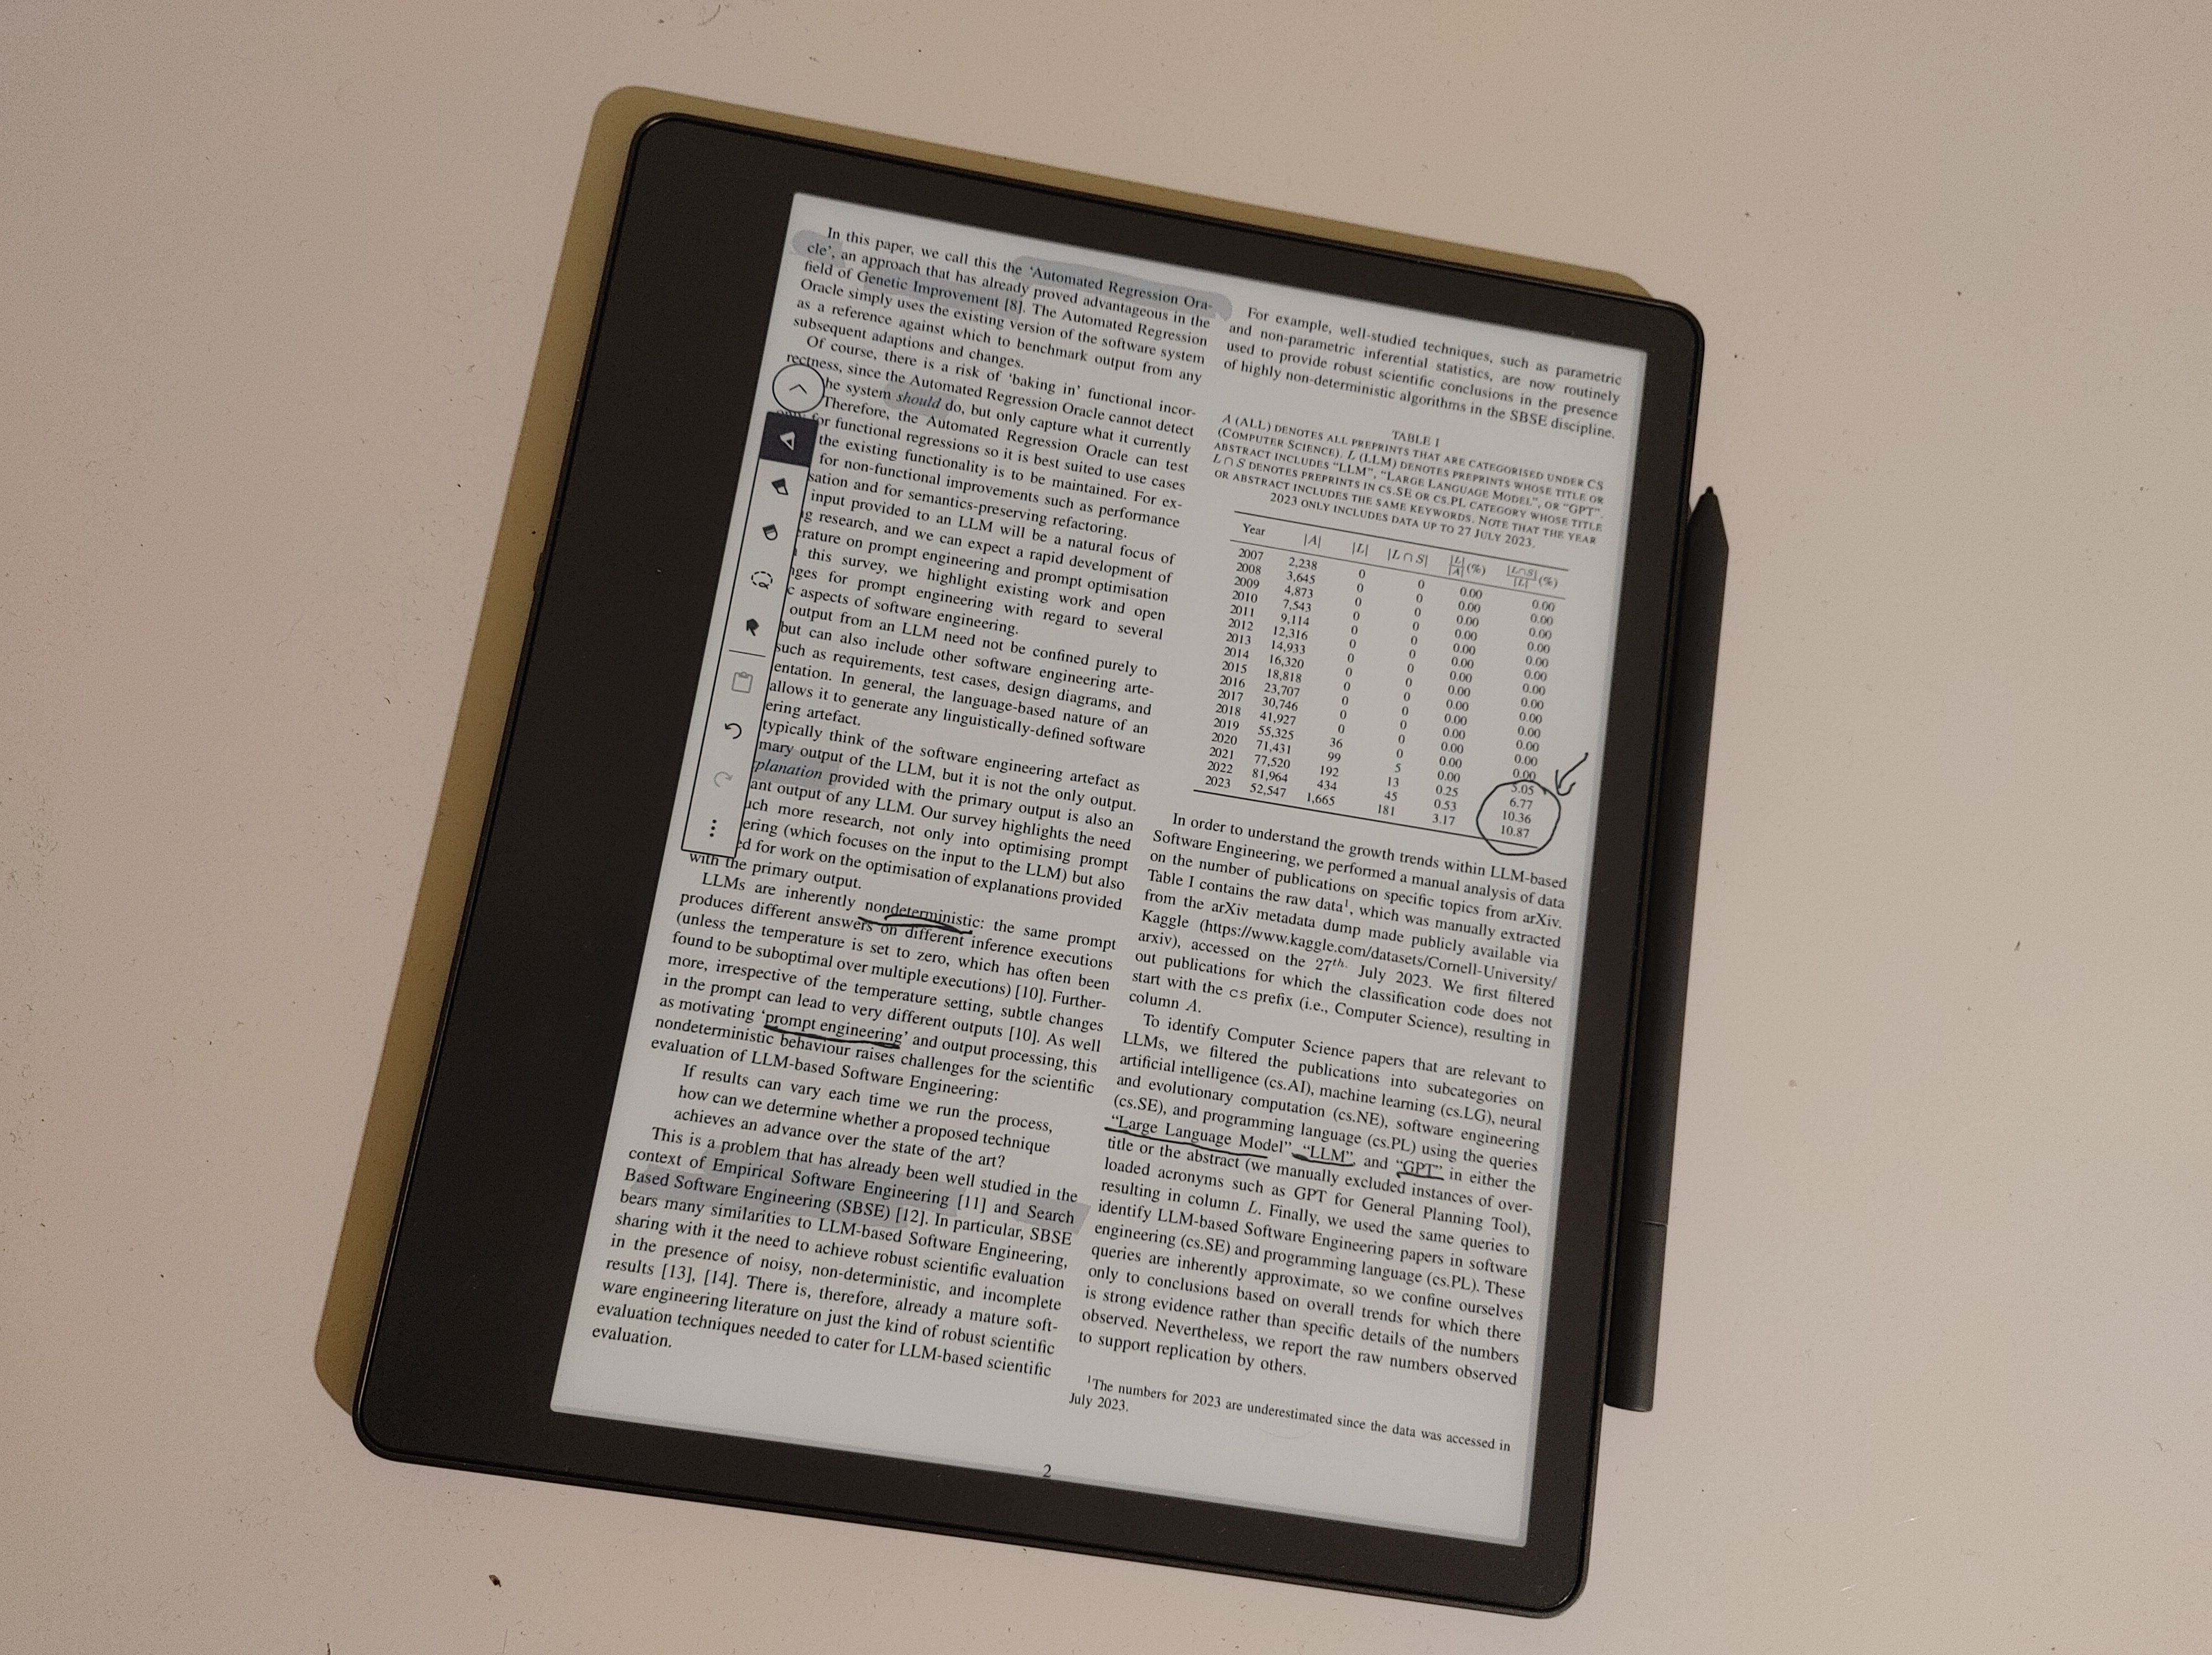 A two-column research paper in PDF format opened on Kindle Scribe eInk reader with added highlights and scribbles.